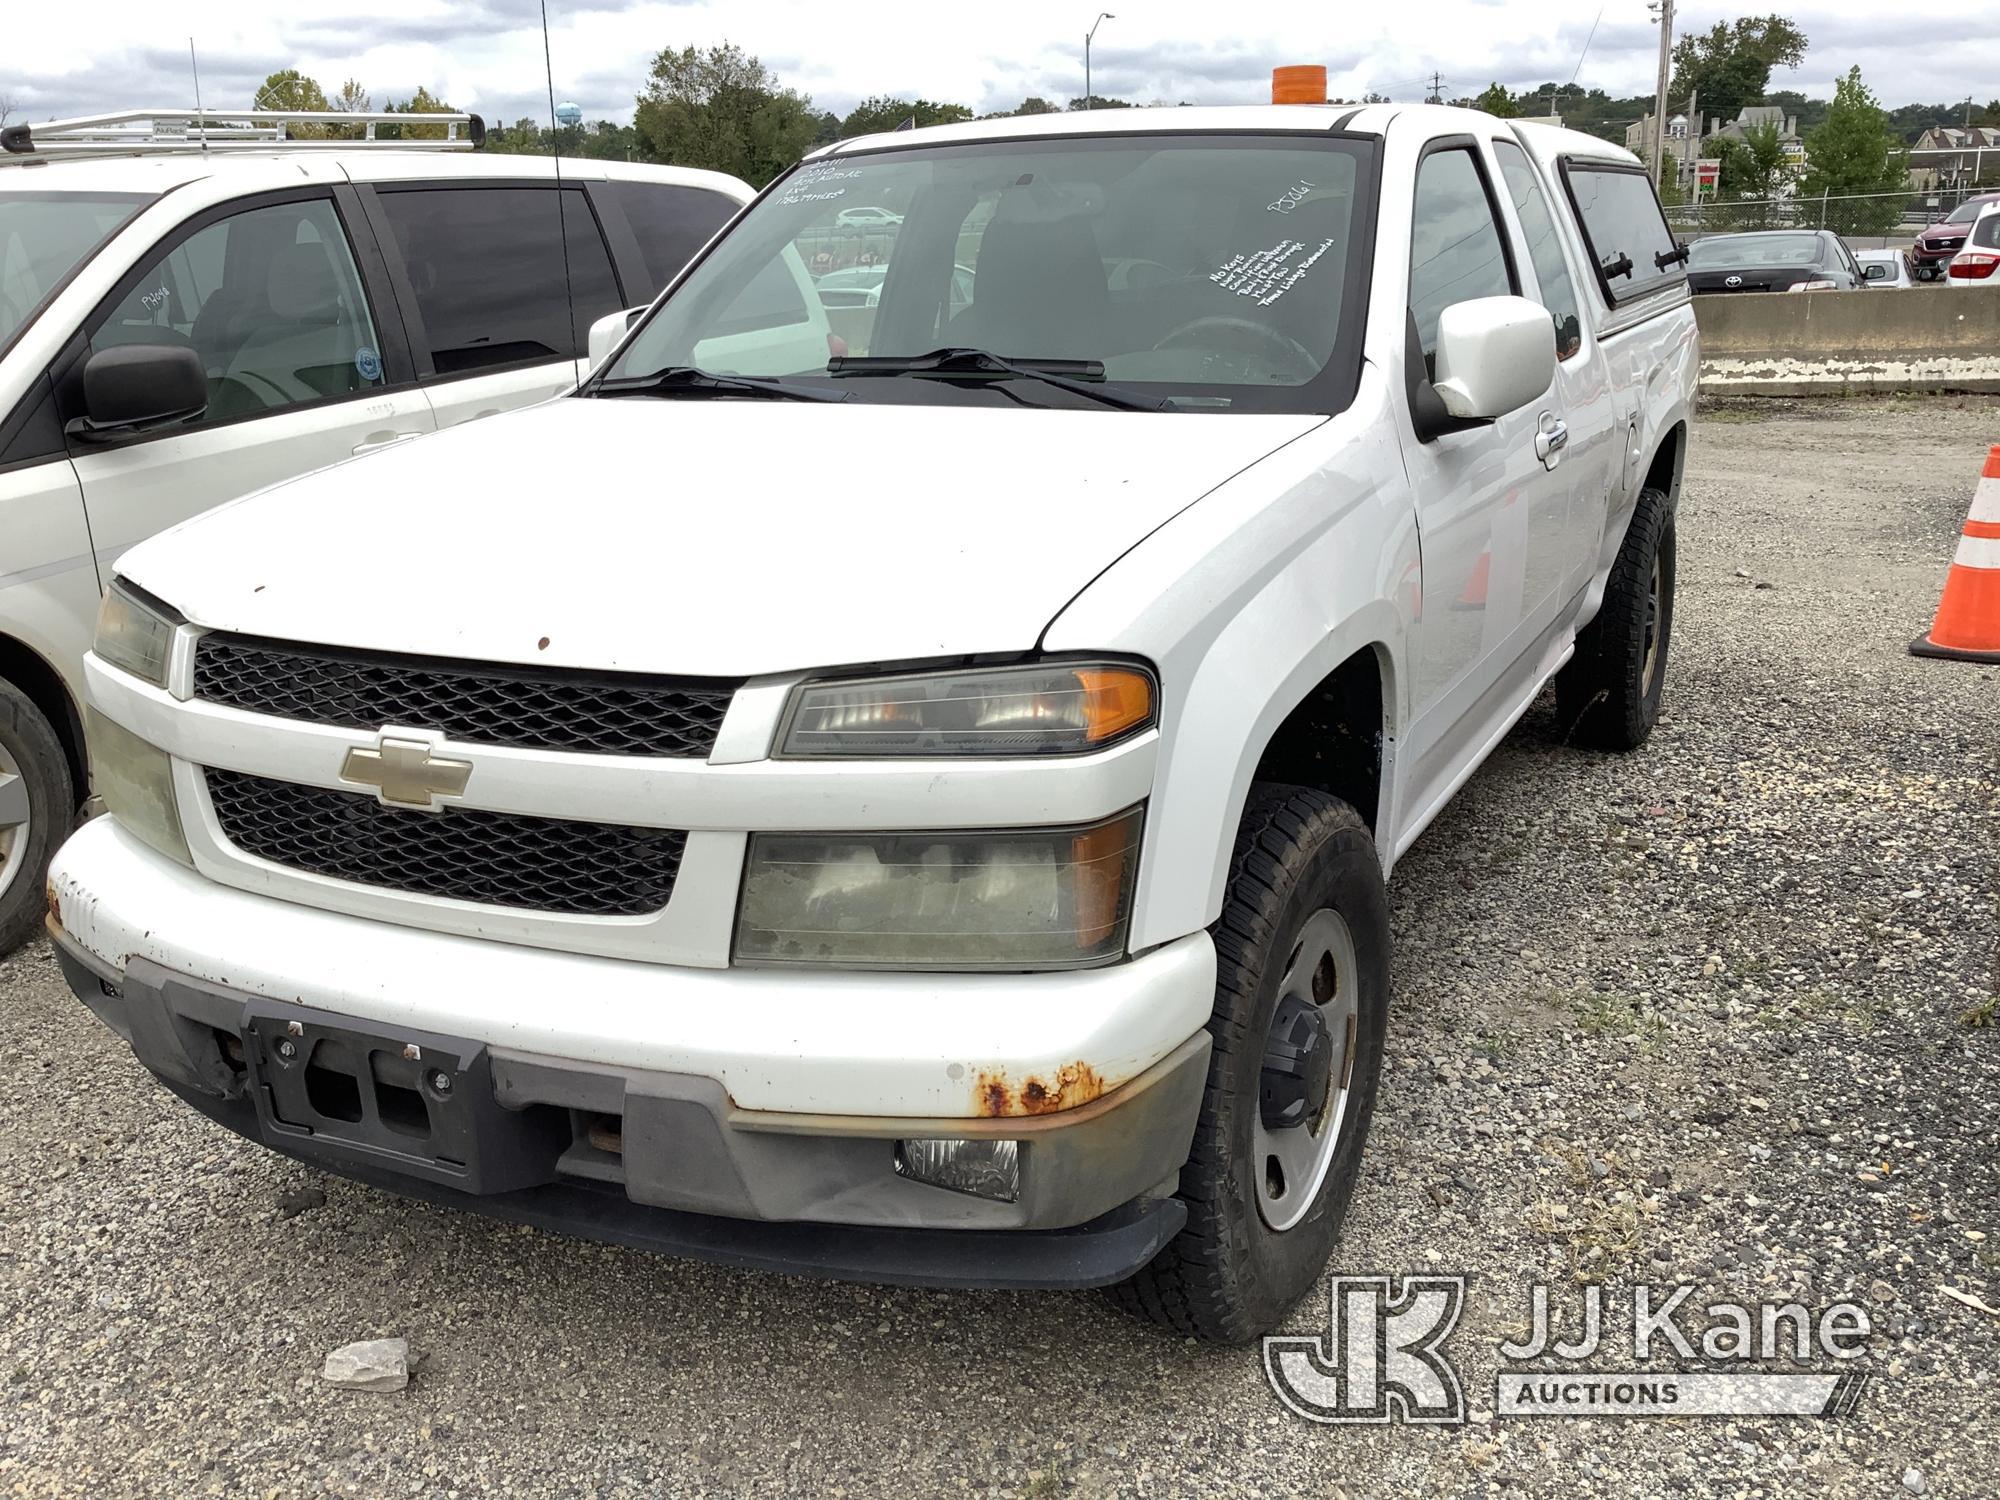 (Plymouth Meeting, PA) 2010 Chevrolet Colorado 4x4 Extended-Cab Pickup Truck No Key, Not Running, Co